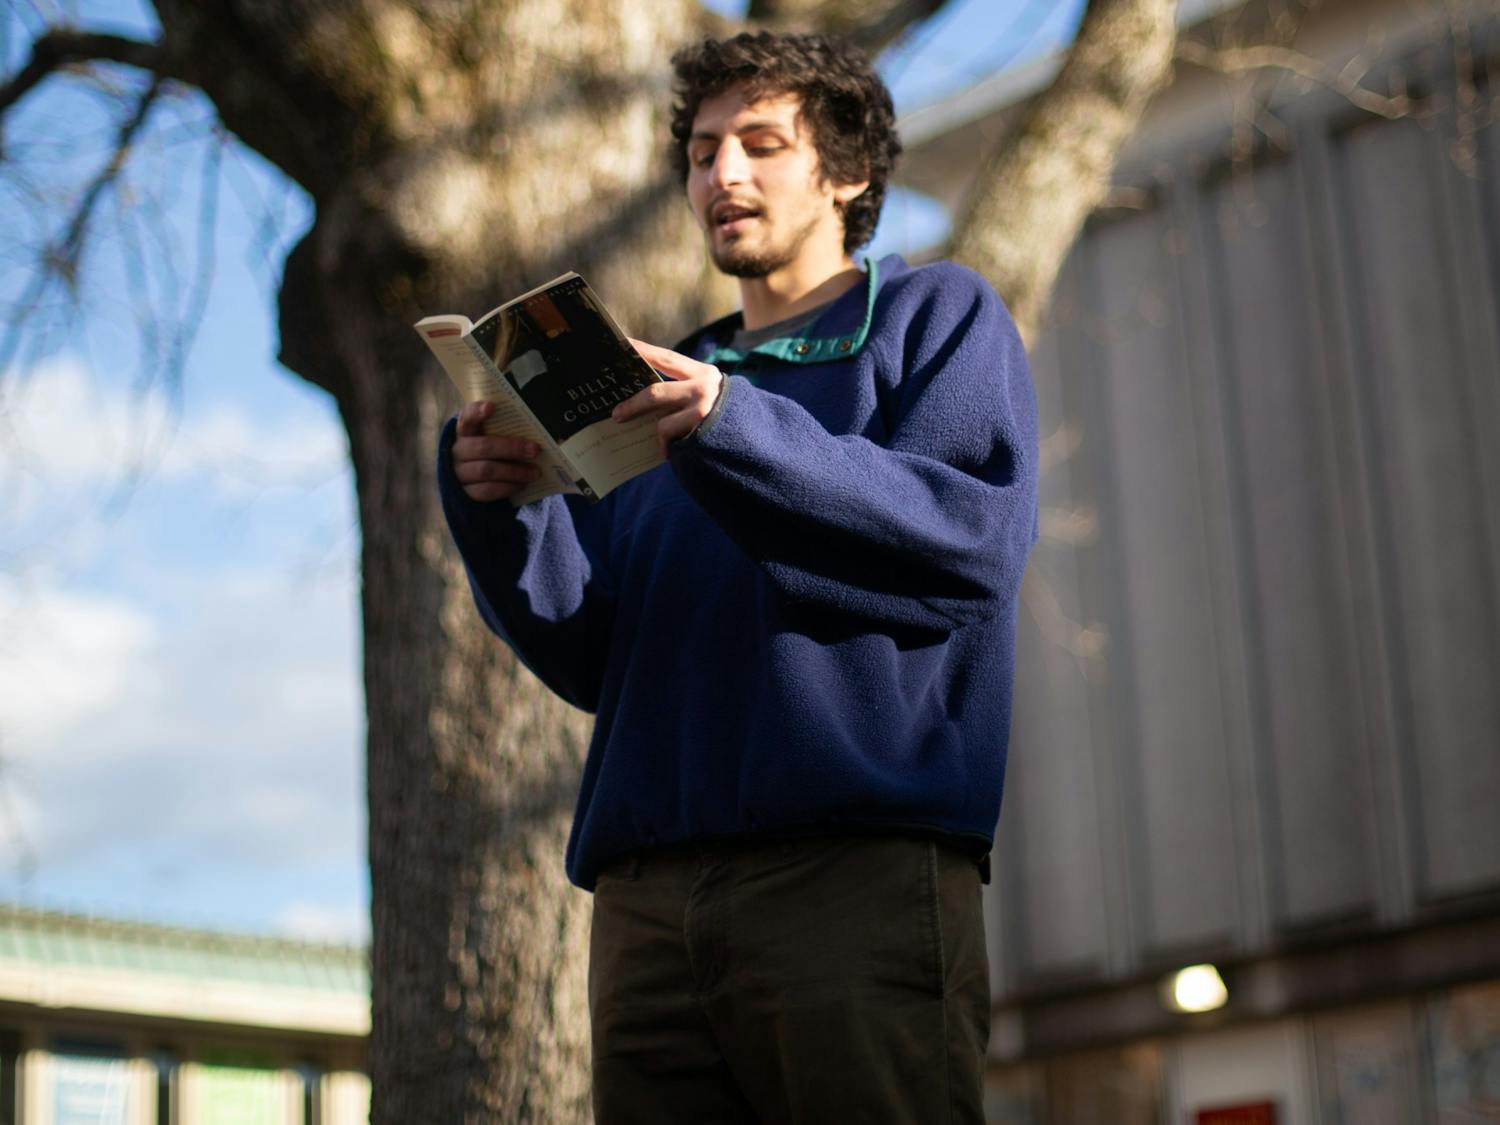 Ben Goldman, a former UNC student, reads poetry in the Pit on Monday, Jan. 18, 2021. Goldman is pictured here reading works by Billy Collins.